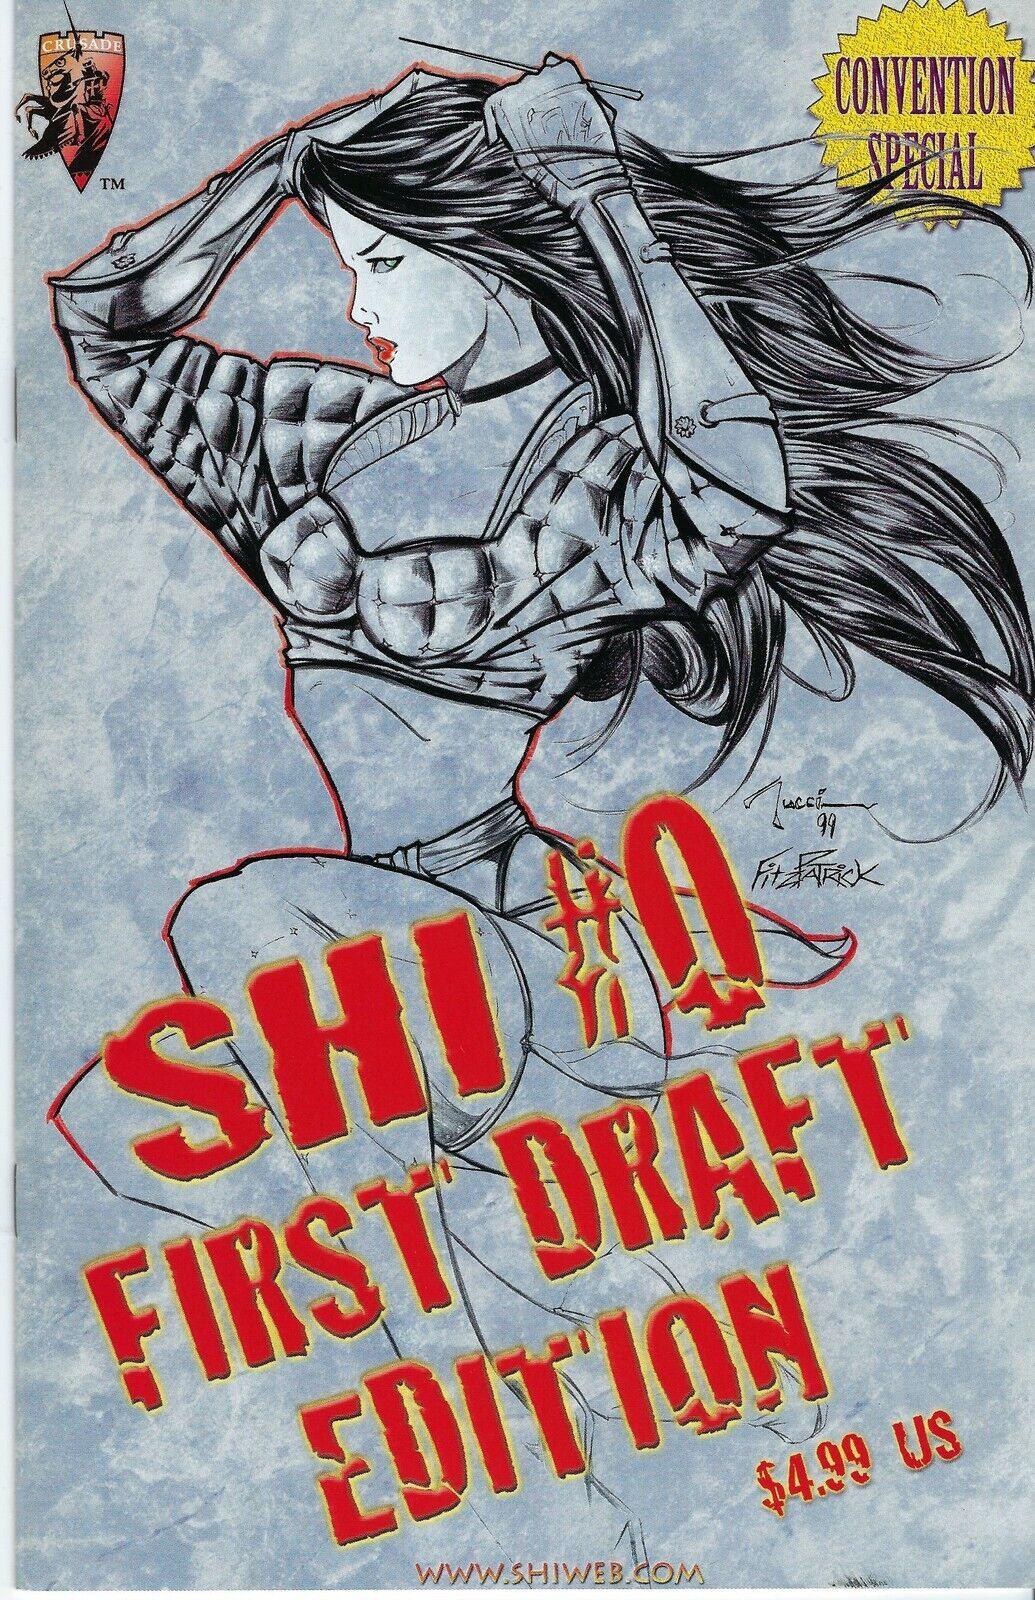 SHI (Crusade-1997)#0A First Draft Edition, Convention Special